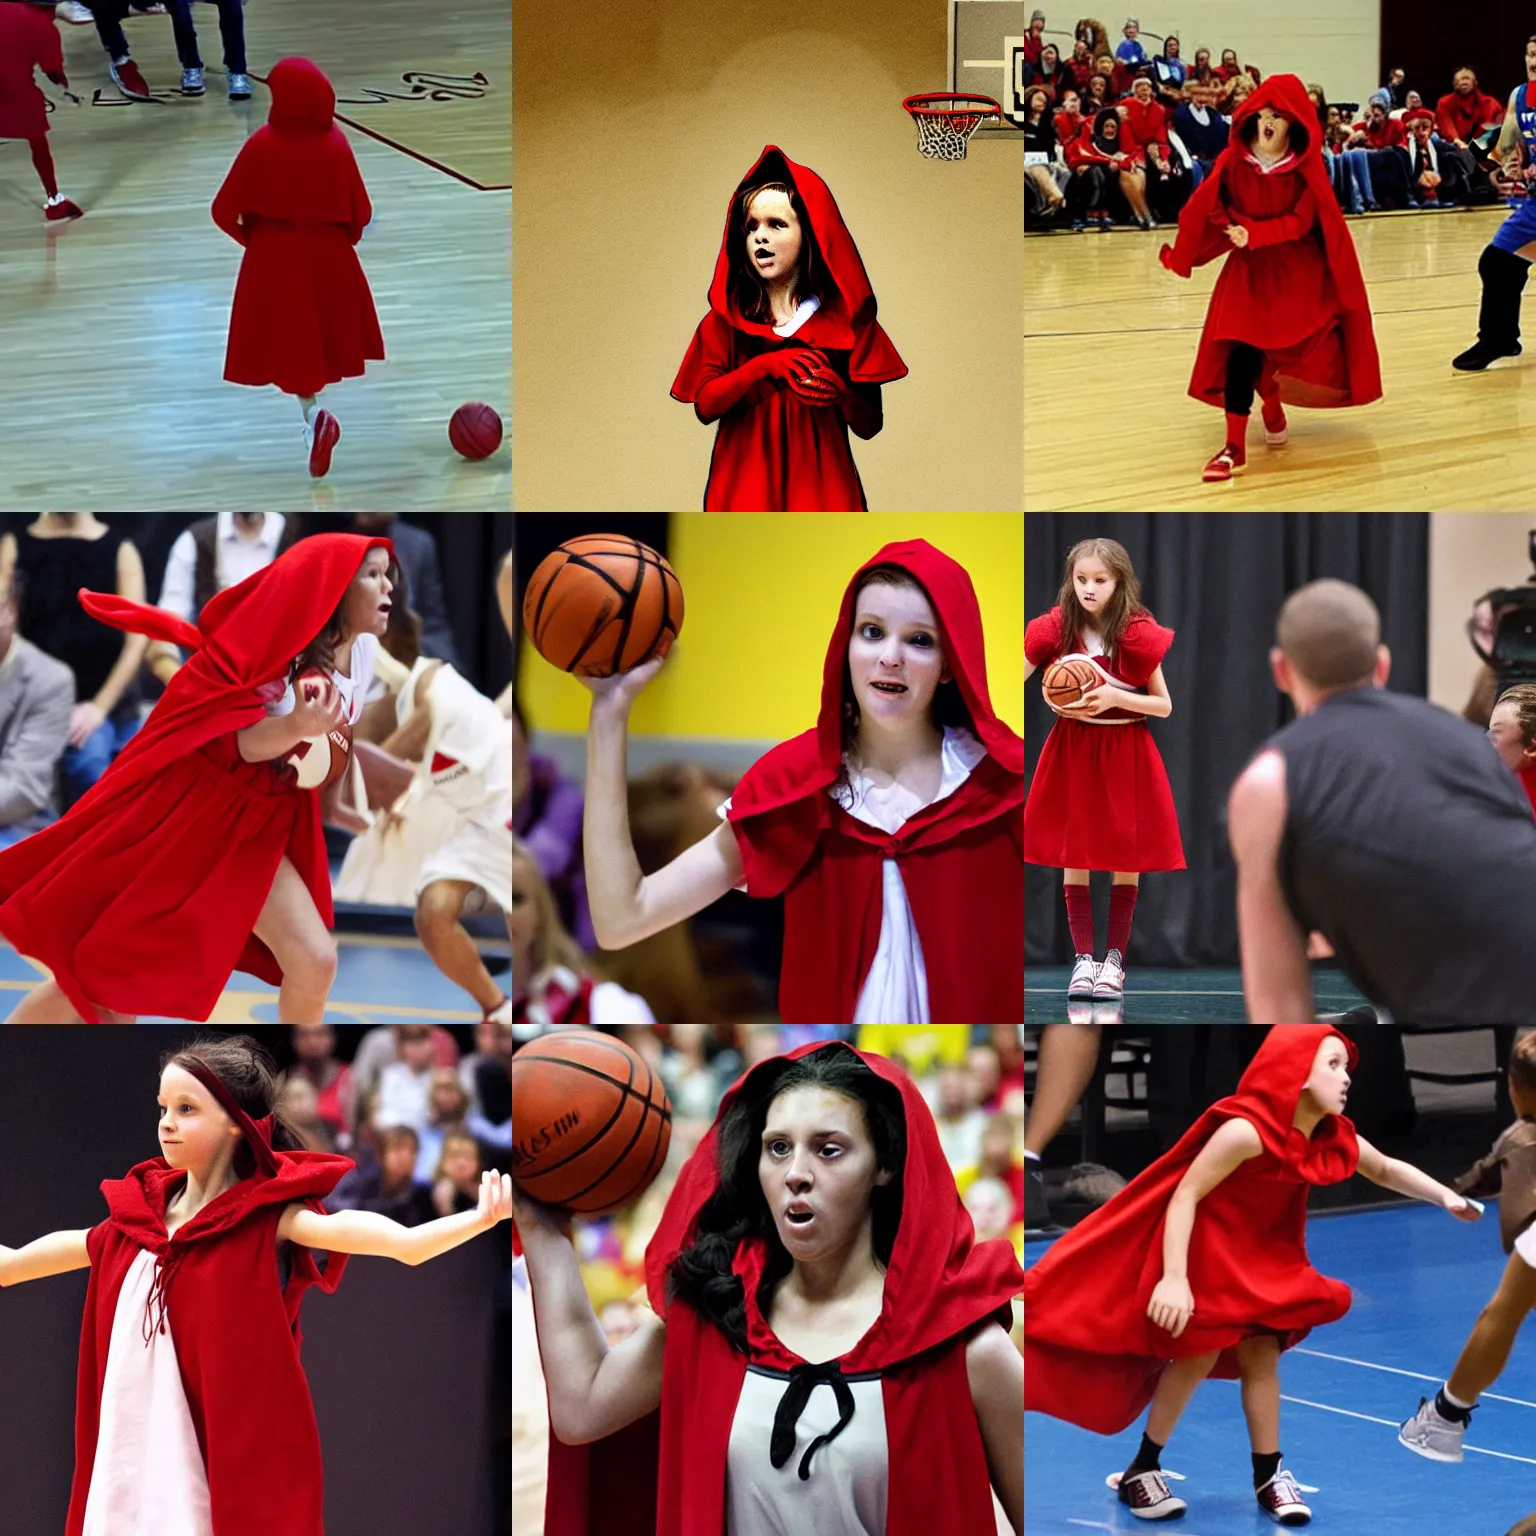 Prompt: Little red riding hood plays basketball against wolves in court to win an oscar